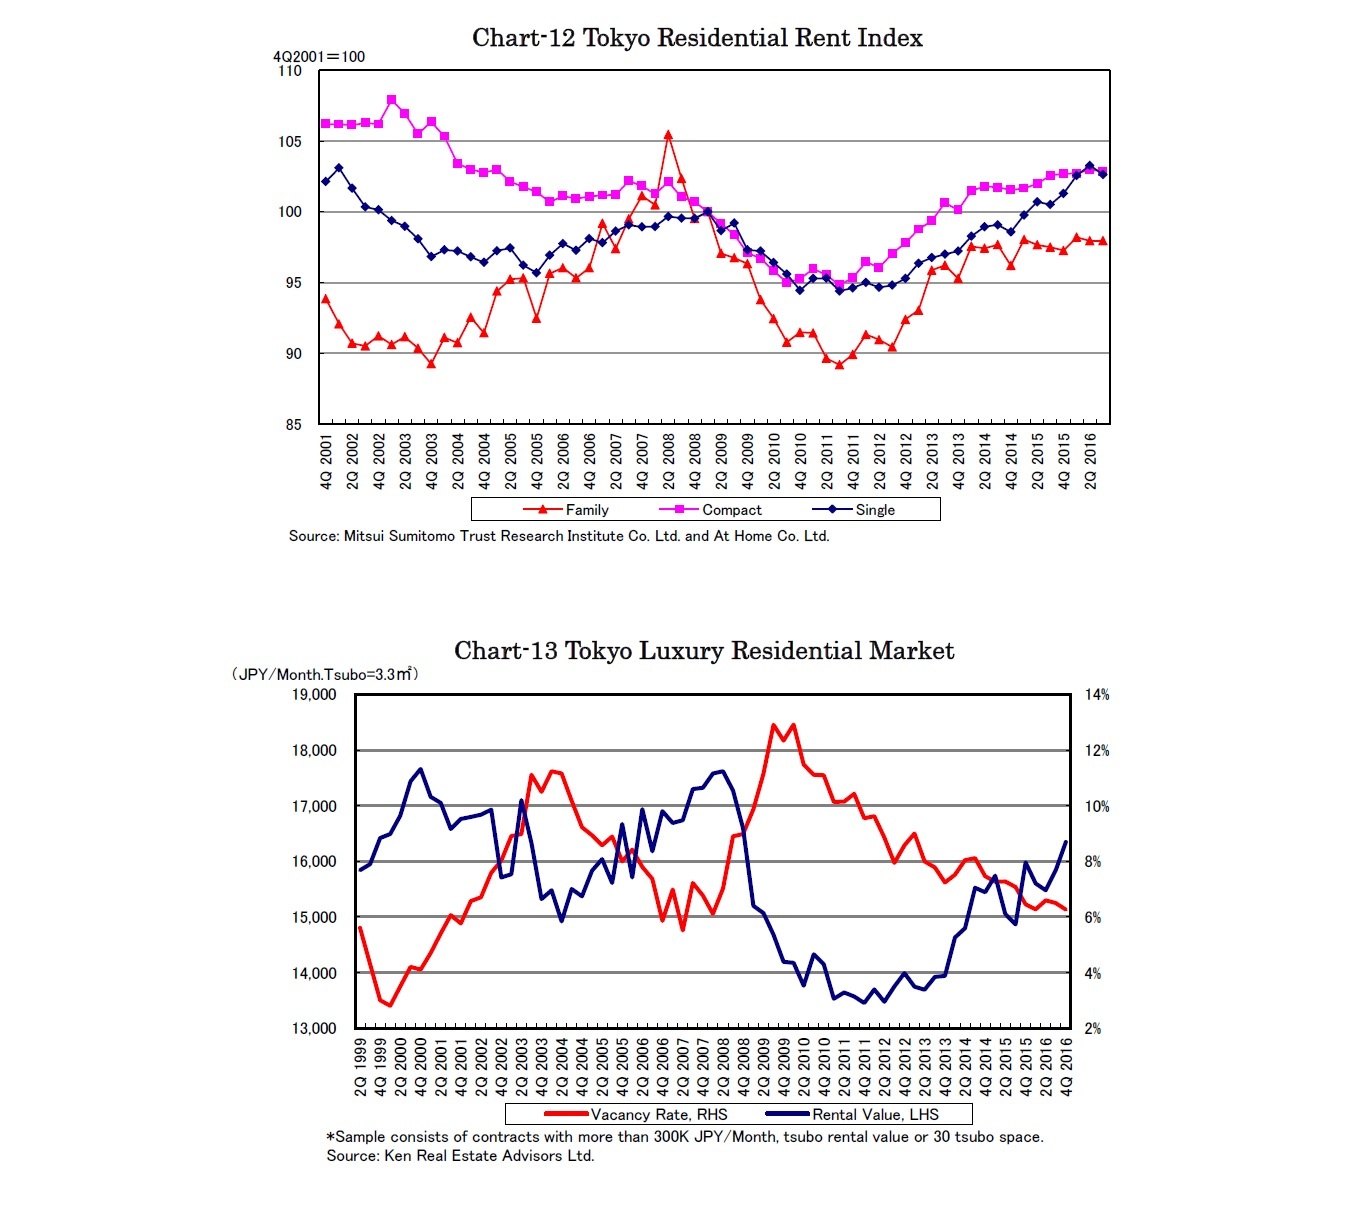 Chart-12 Tokyo Residential Rent Index/Chart-13 Tokyo Luxury Residential Market